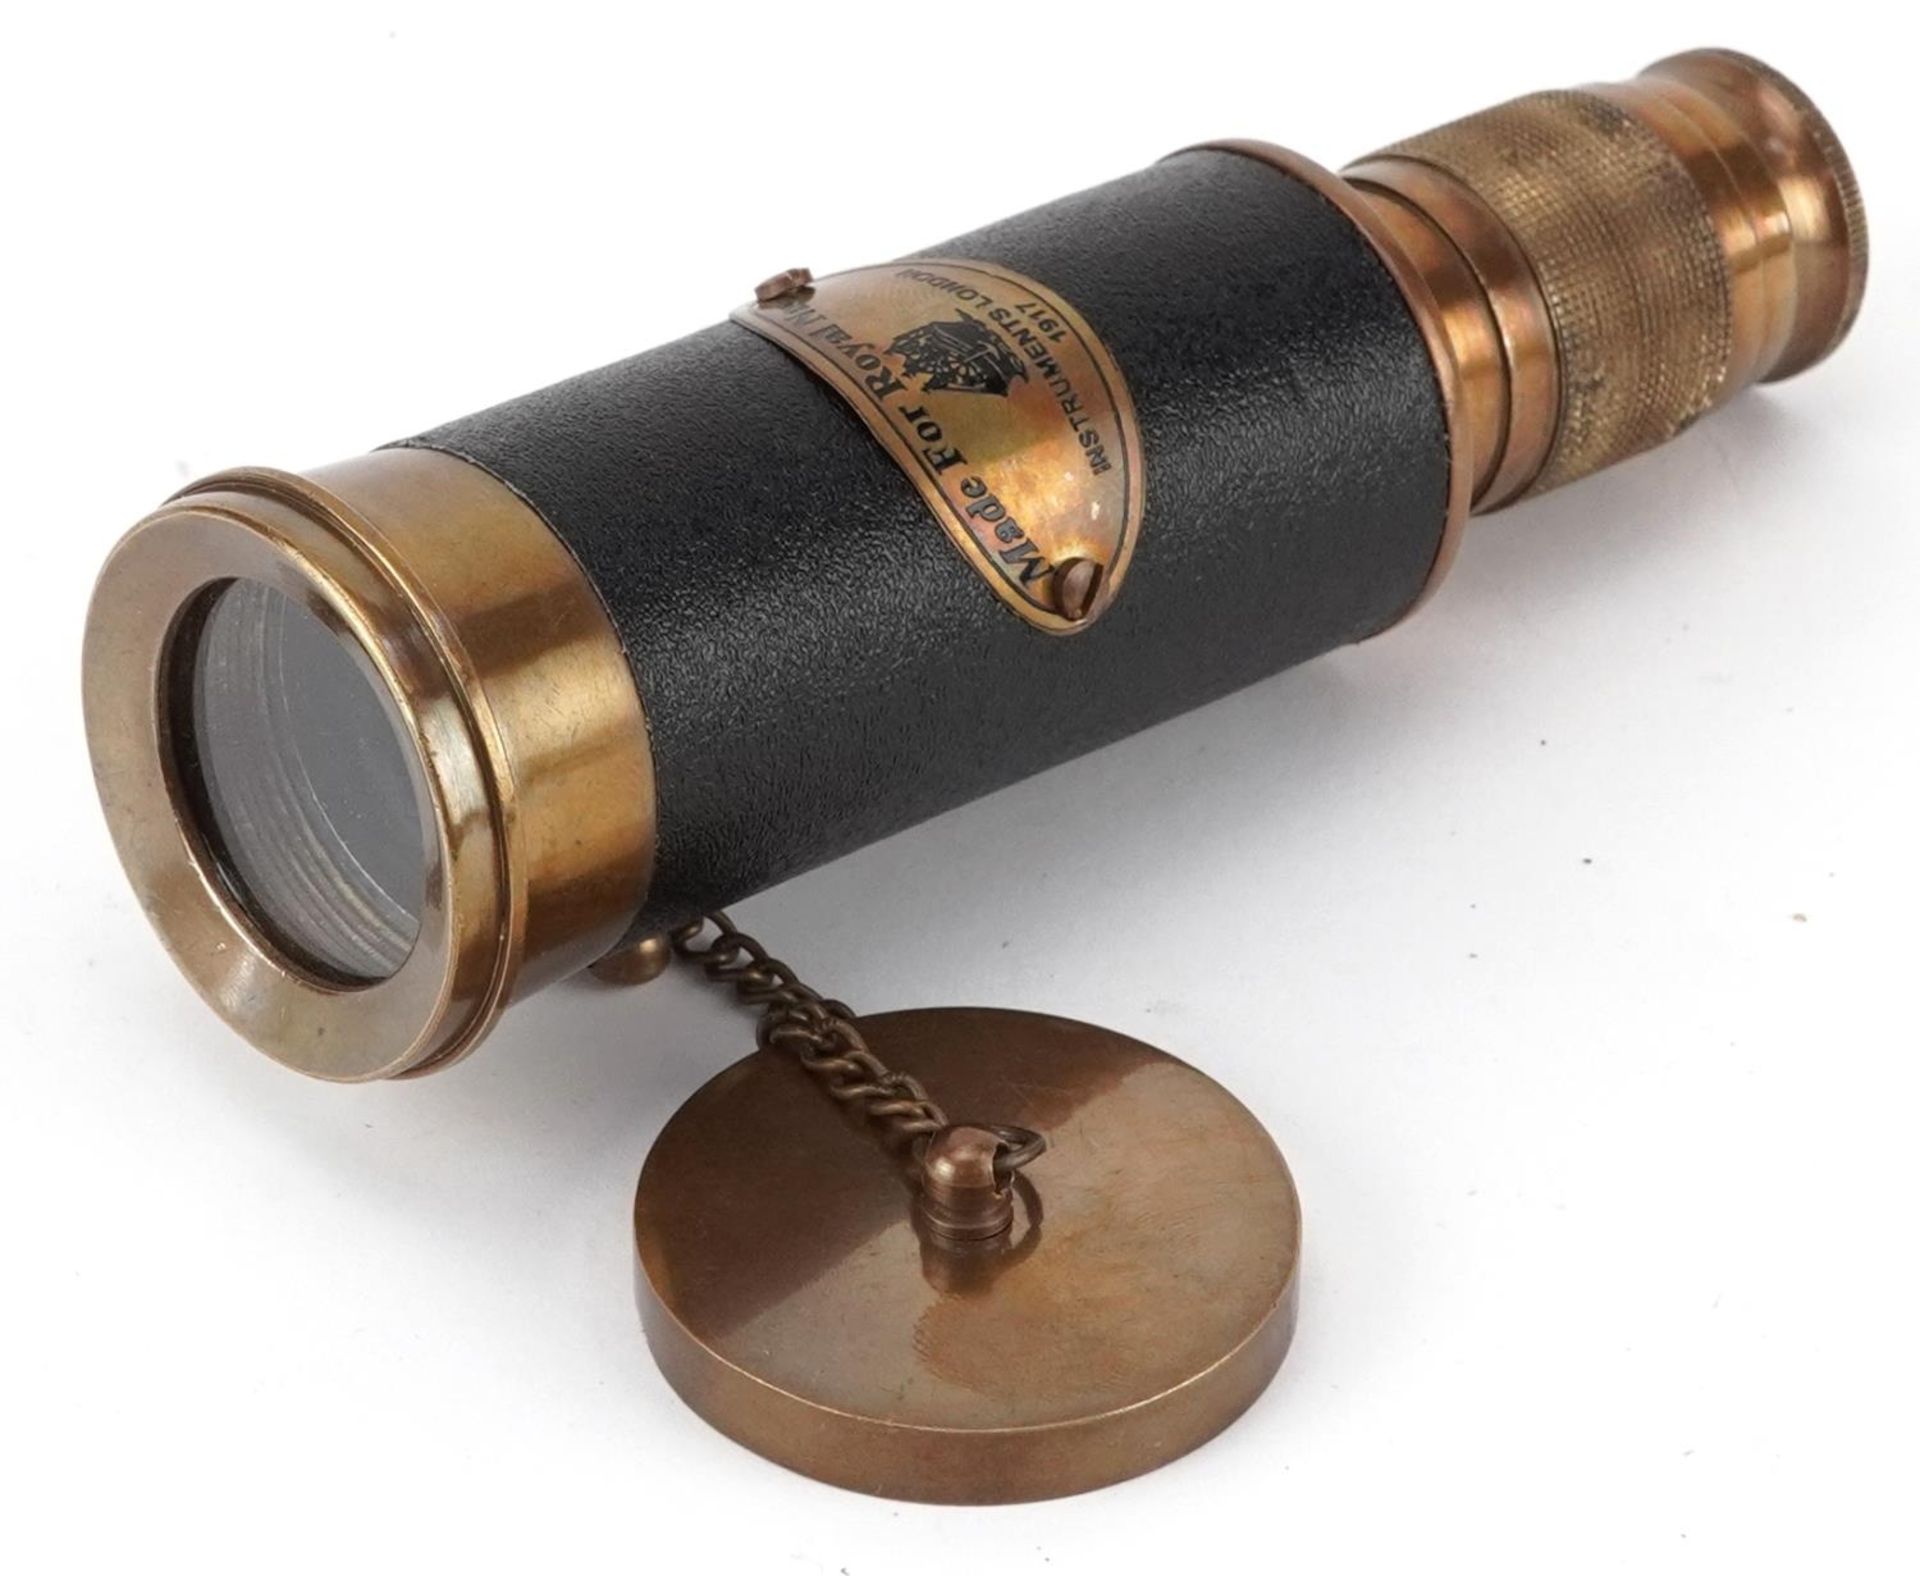 Navy interest spotting scope with lens cover